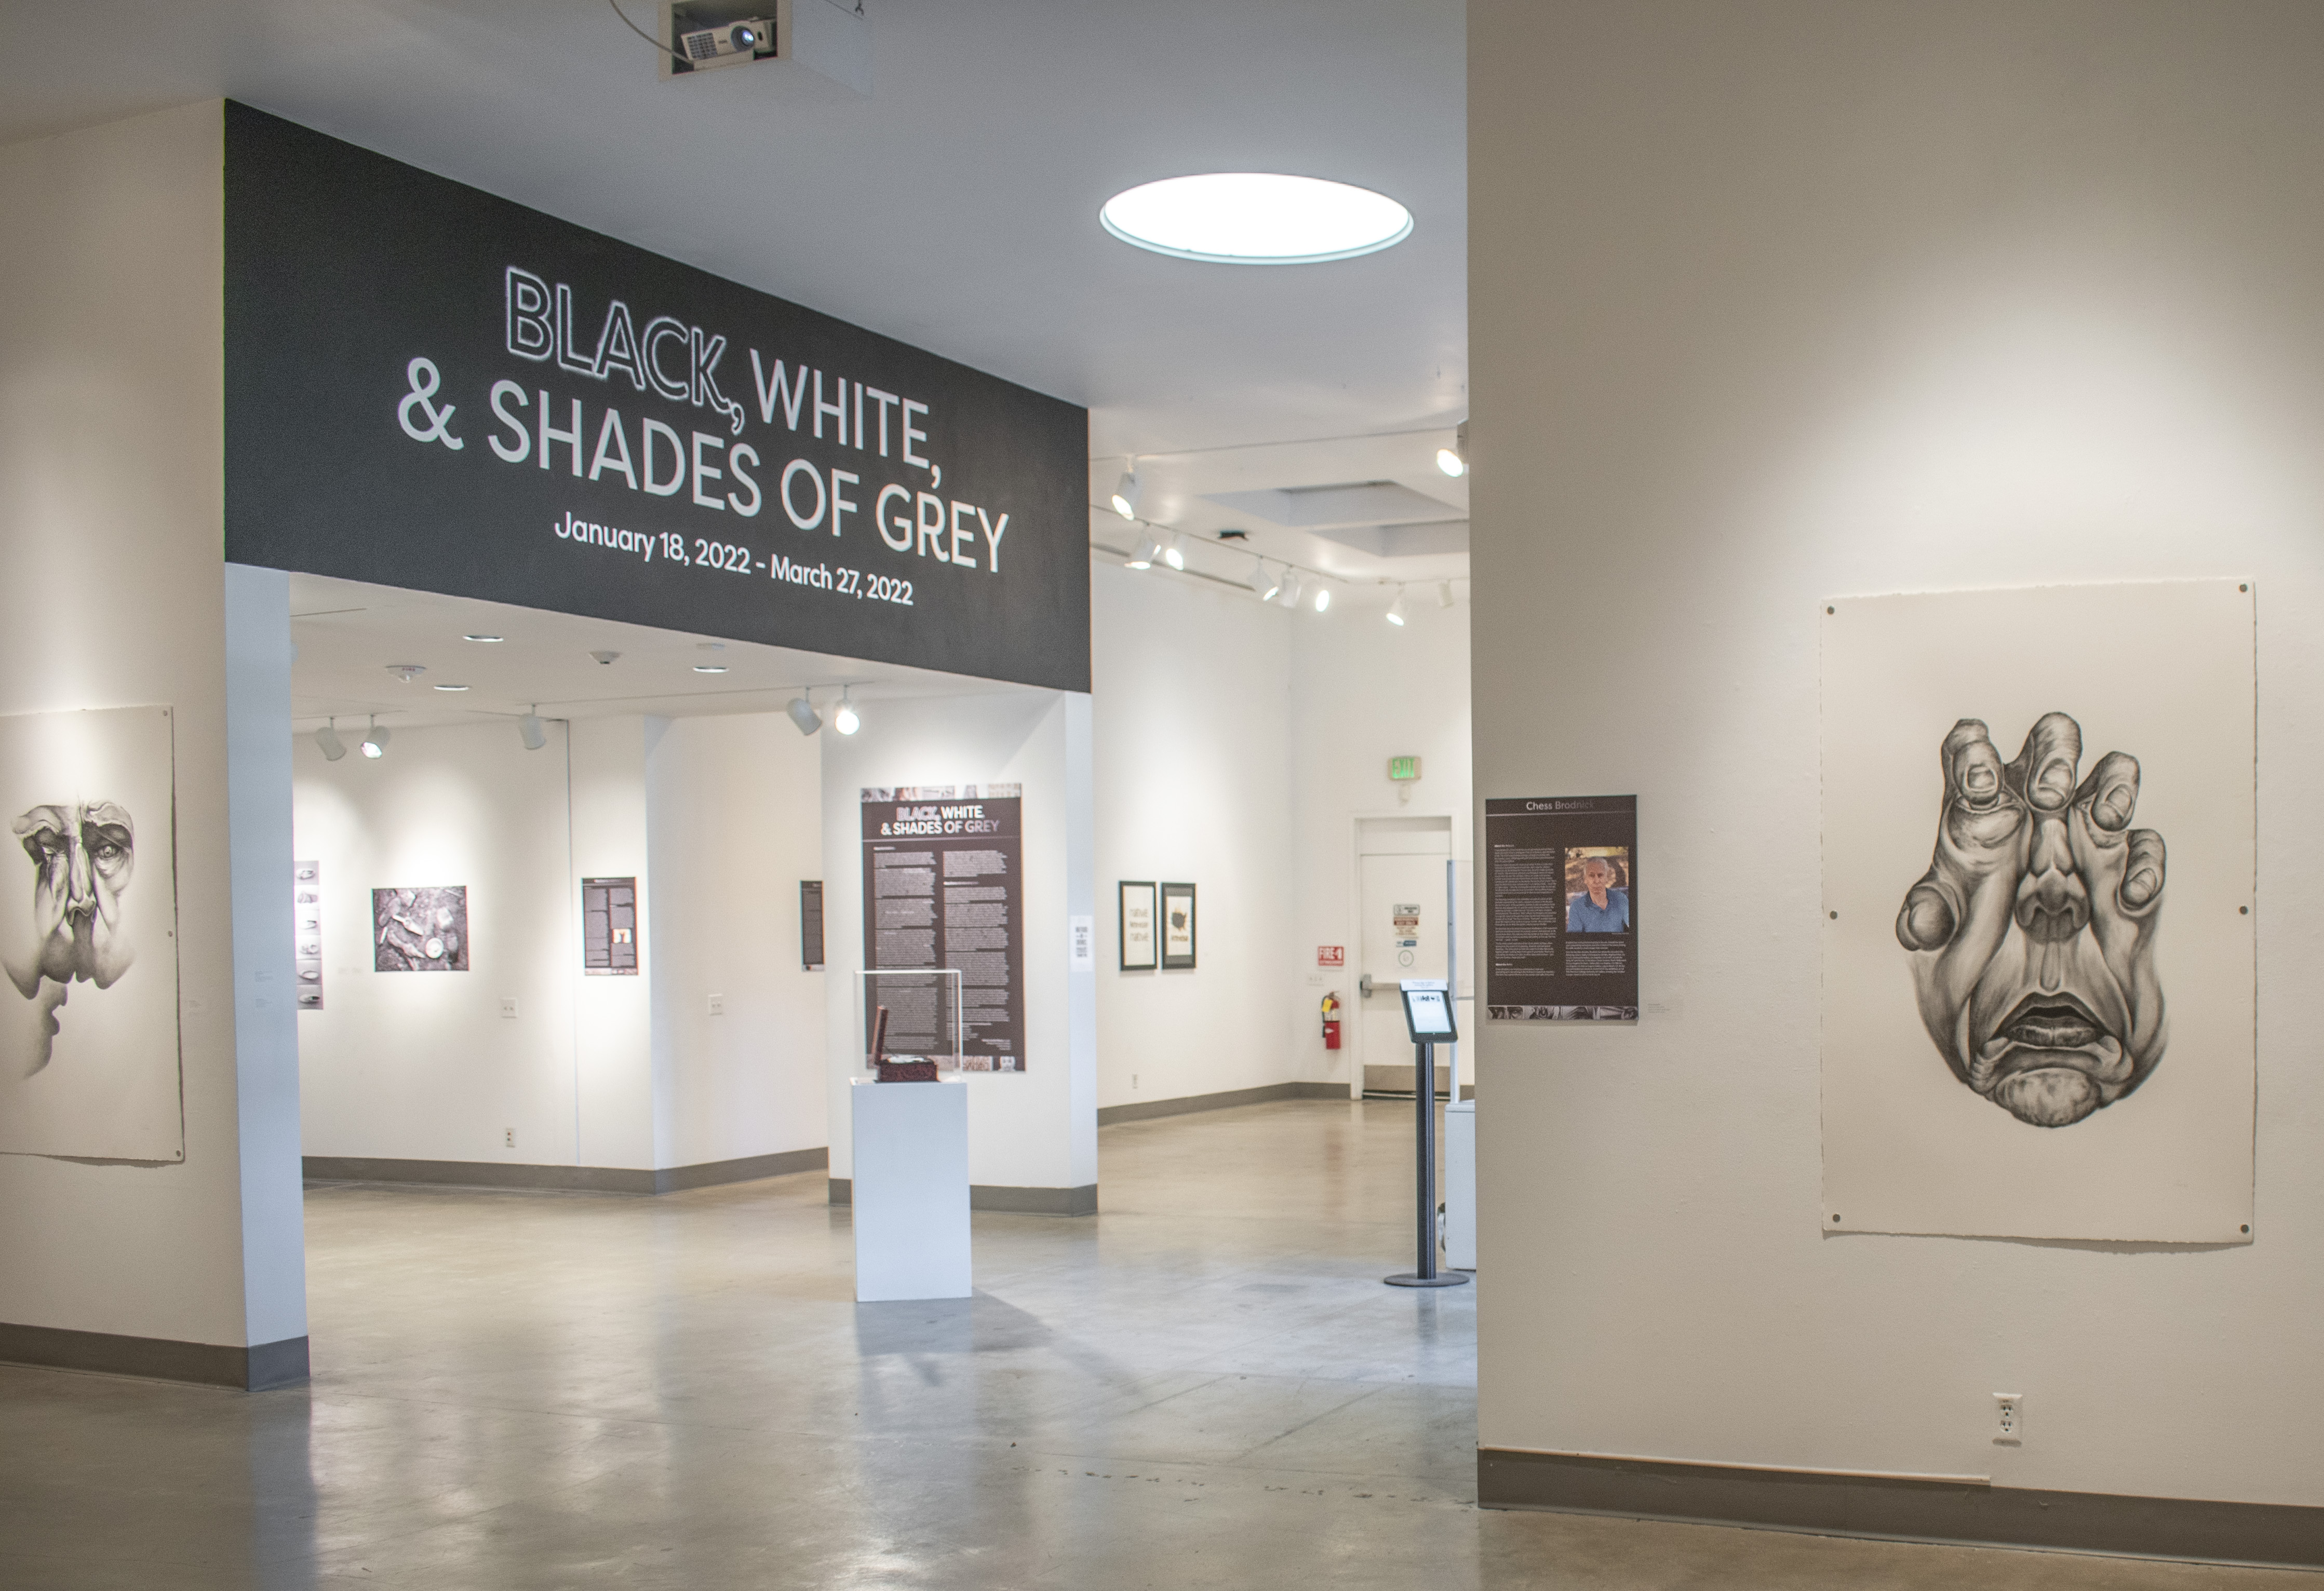 Our Black, White, & Shades of Grey exhibition at the Kellogg Art Gallery on campus is closing on March 27th, so that means you have about a week to come in and check it out before its gone! Stop by and check out all the amazing installations. Our hours are Wed-Thurs + Sat-Sun 12-4pm, closed Mondays, Tuesdays, and Fridays. Hope to see you all soon. 2022 to Mar. 27, 2022.